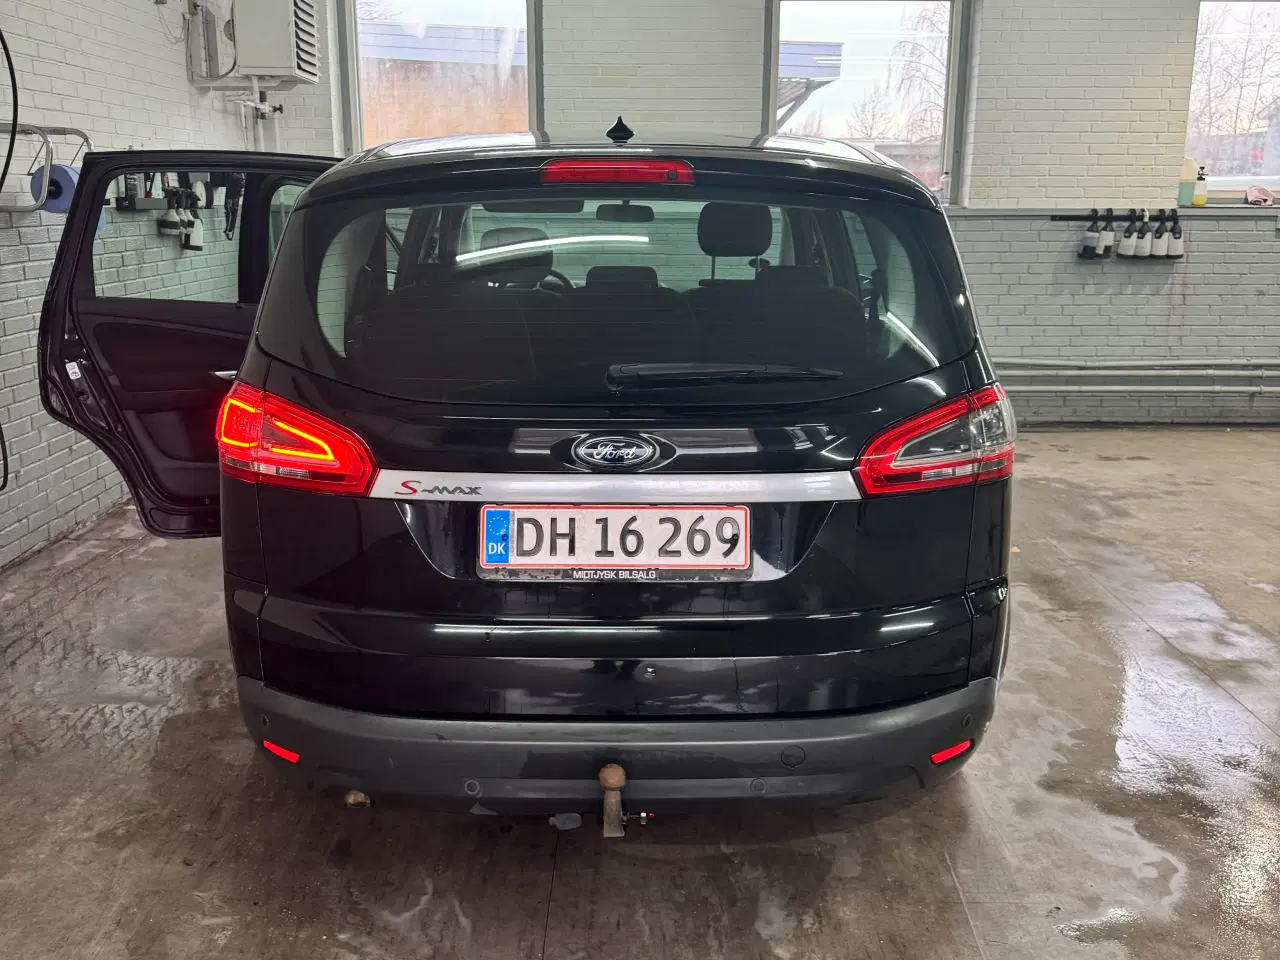 Billede 3 - Ford S-Max - 7 personers 